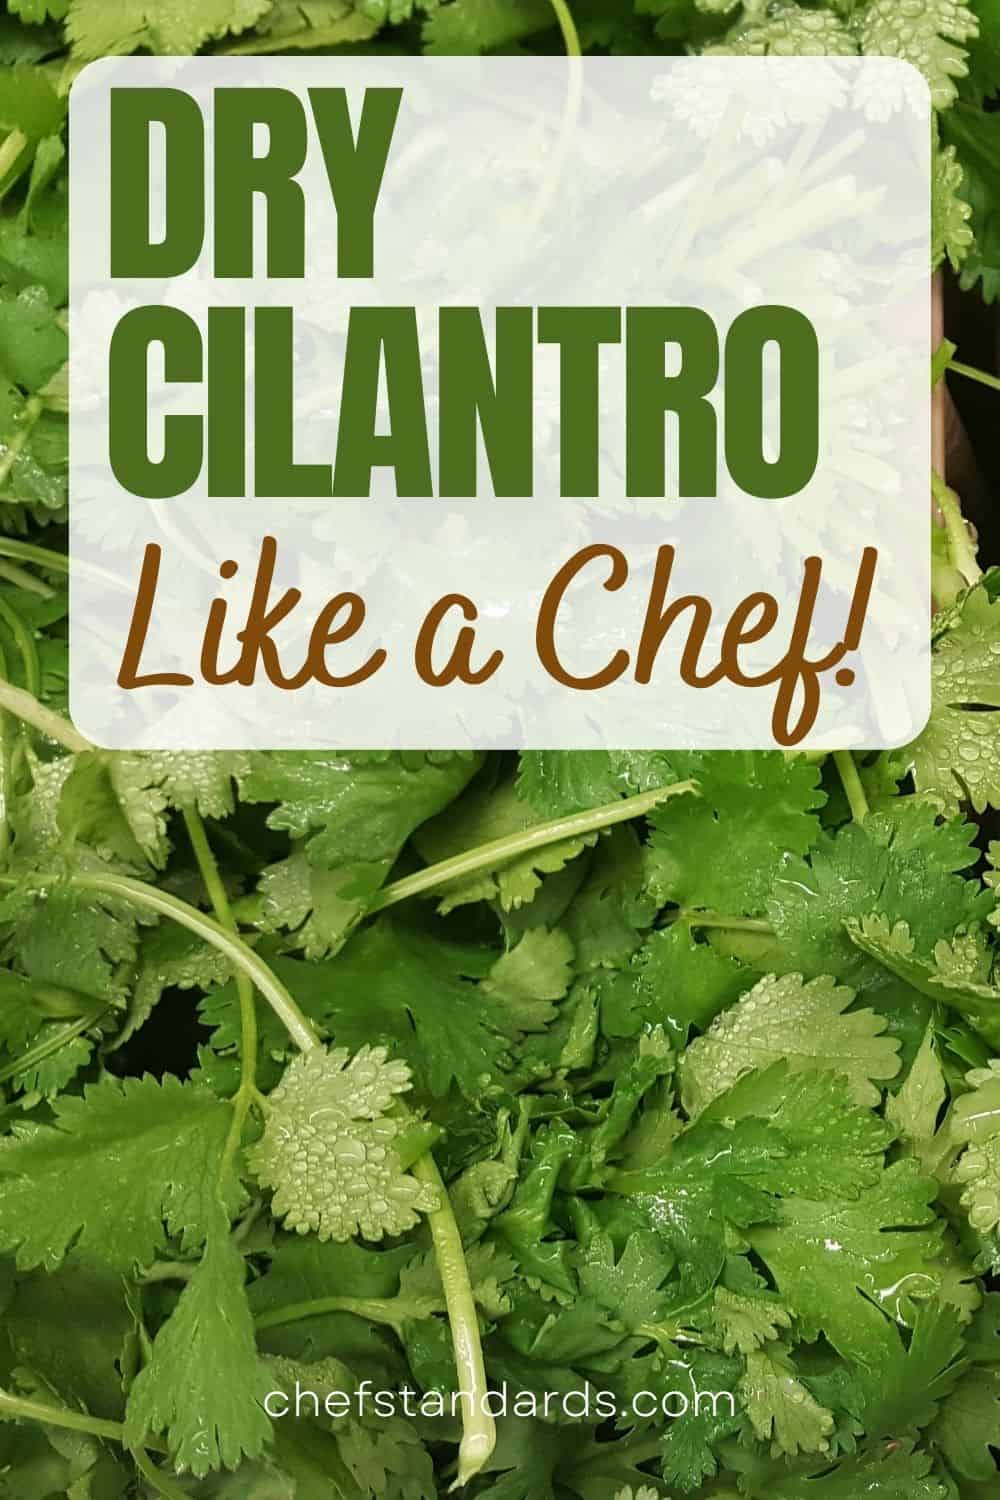 How To Dry Cilantro And Enjoy It All Year Long (4 Methods)
